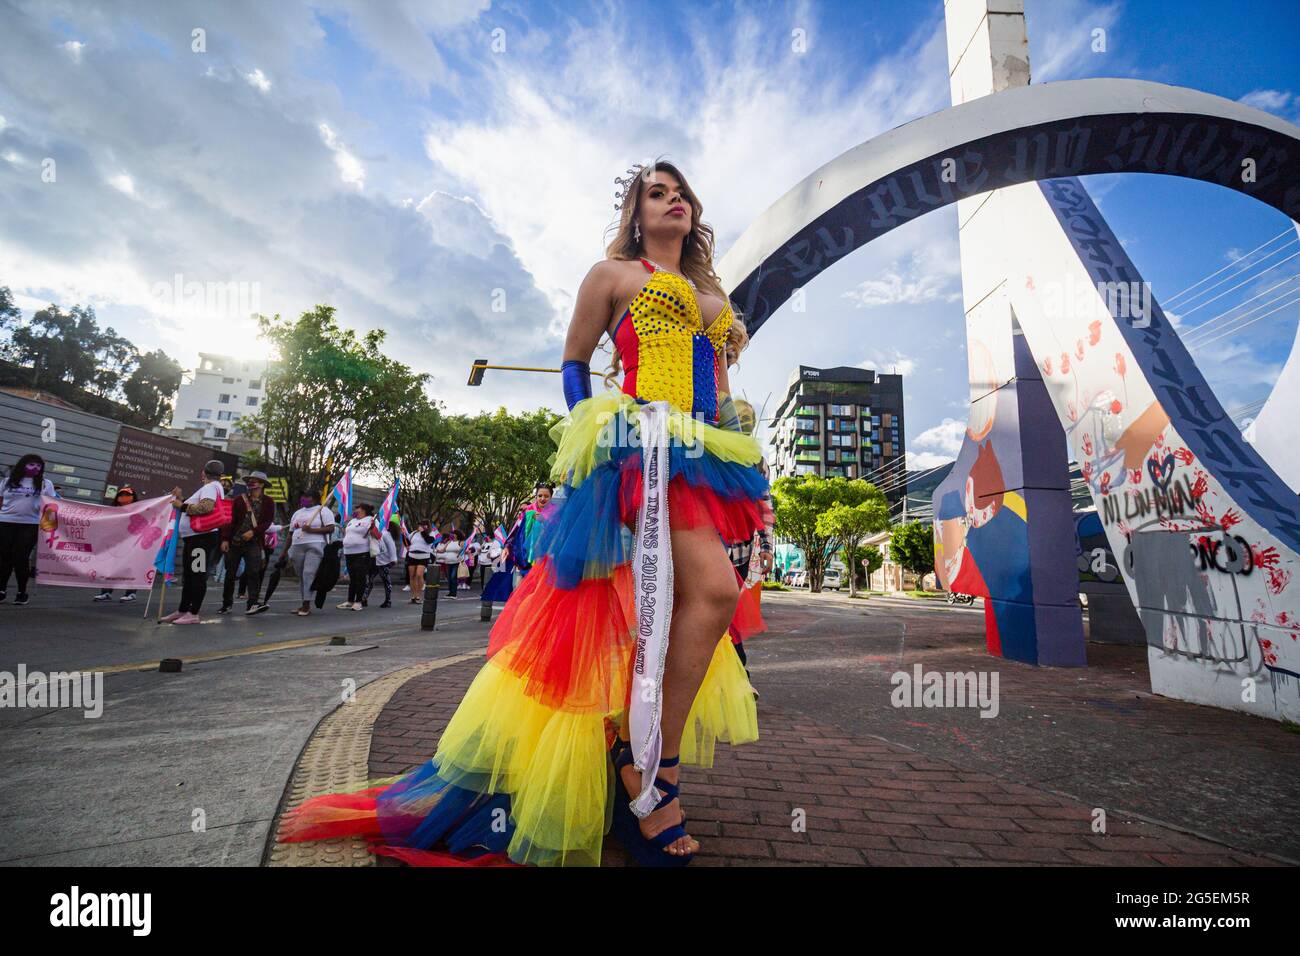 A trans women member of the LGTBQ community wears a dress with the Colombian flag colors during the annual celebreation of the Pride Parade in demand of LGTBQ rights in Colombia in Pasto, Narino - Colombia on June 25, 2021. Stock Photo